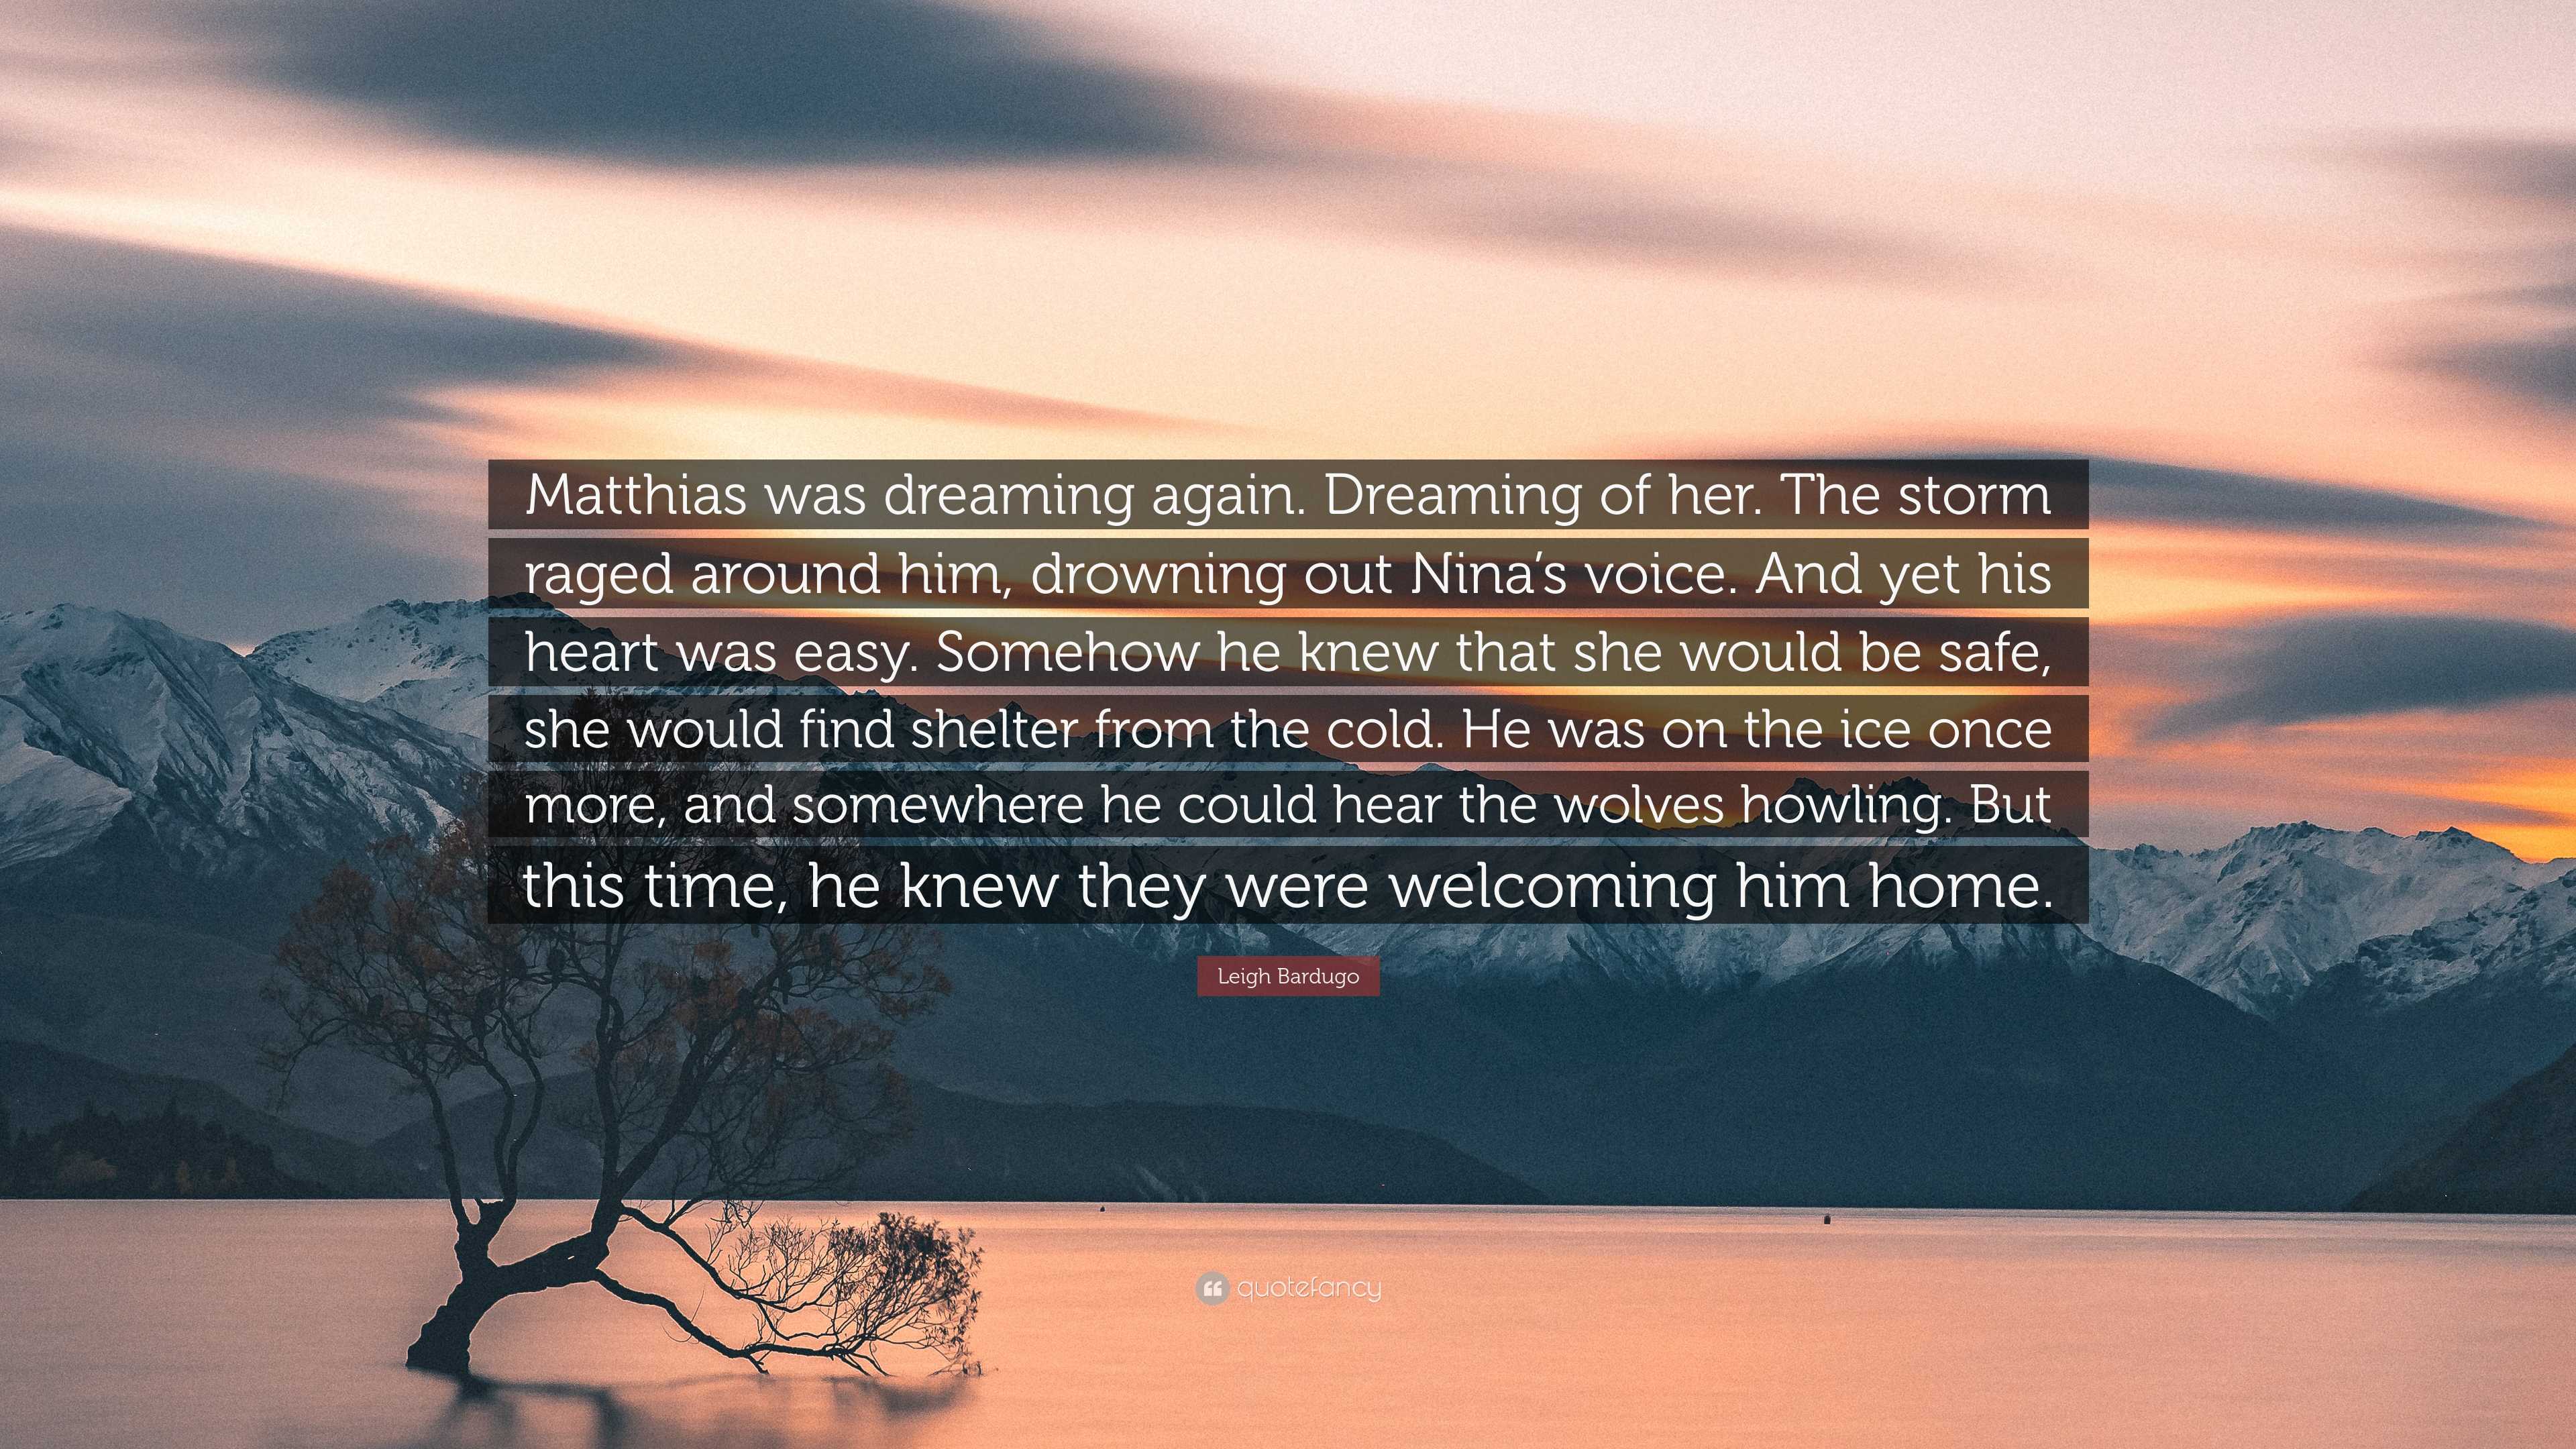 What if we've all been dreaming?. Imagine you were dreaming, and…, by Matt, nestedmind